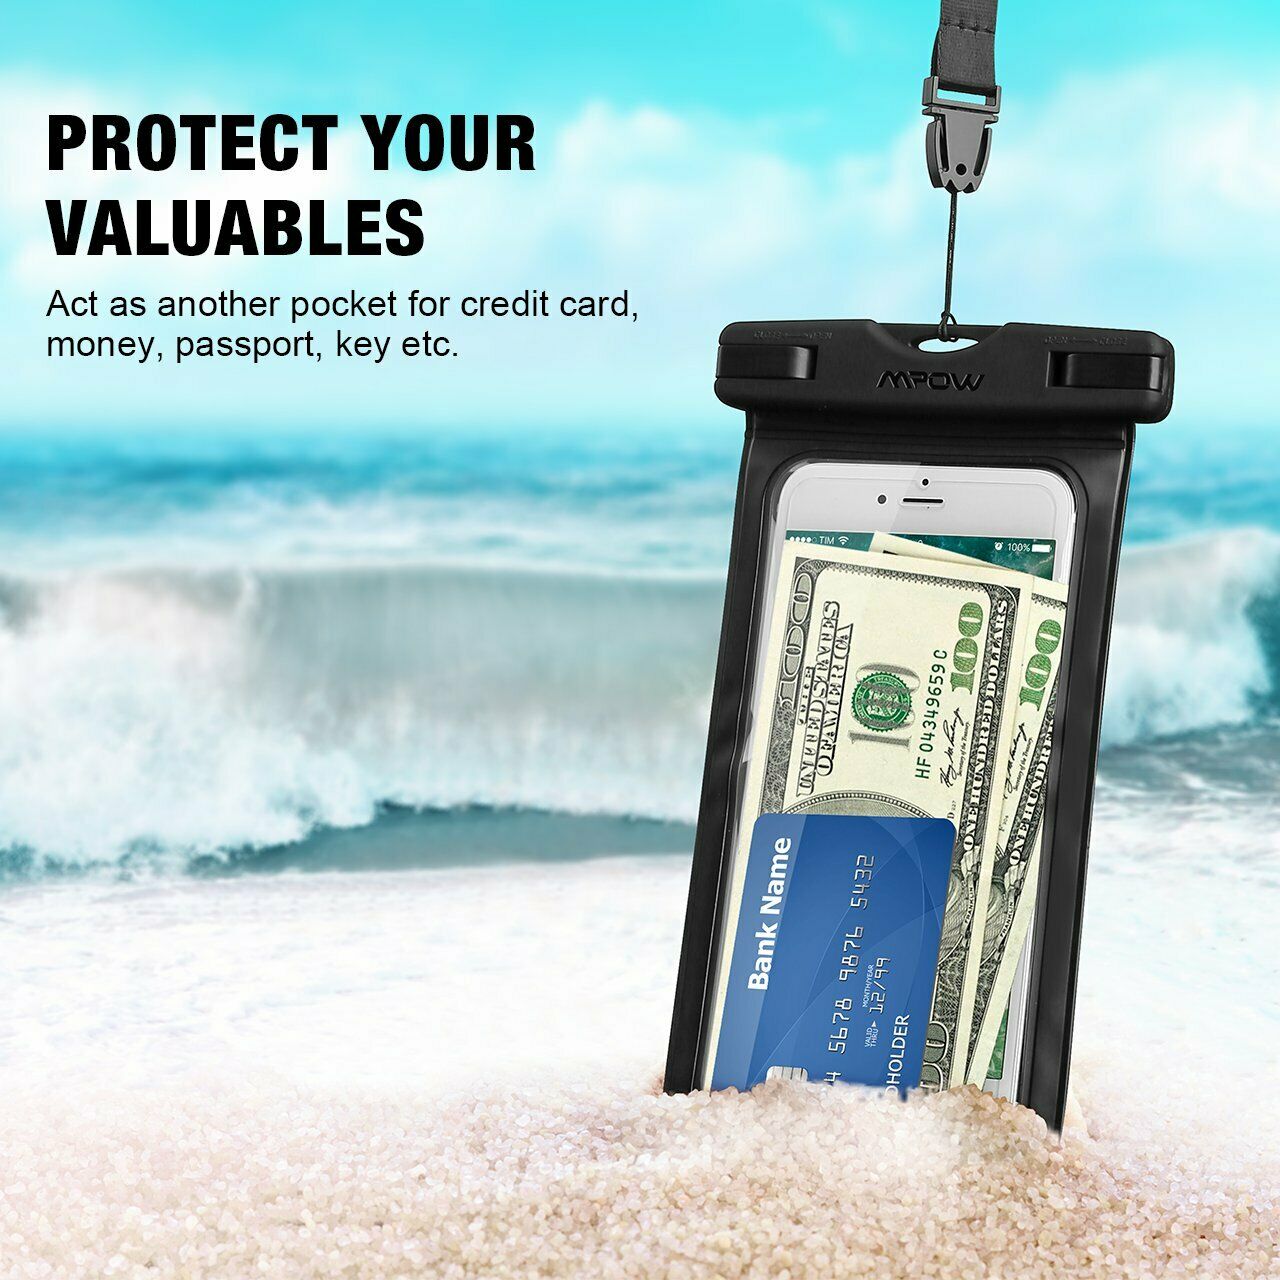 2pc Waterproof Floating Cell Phone Pouch